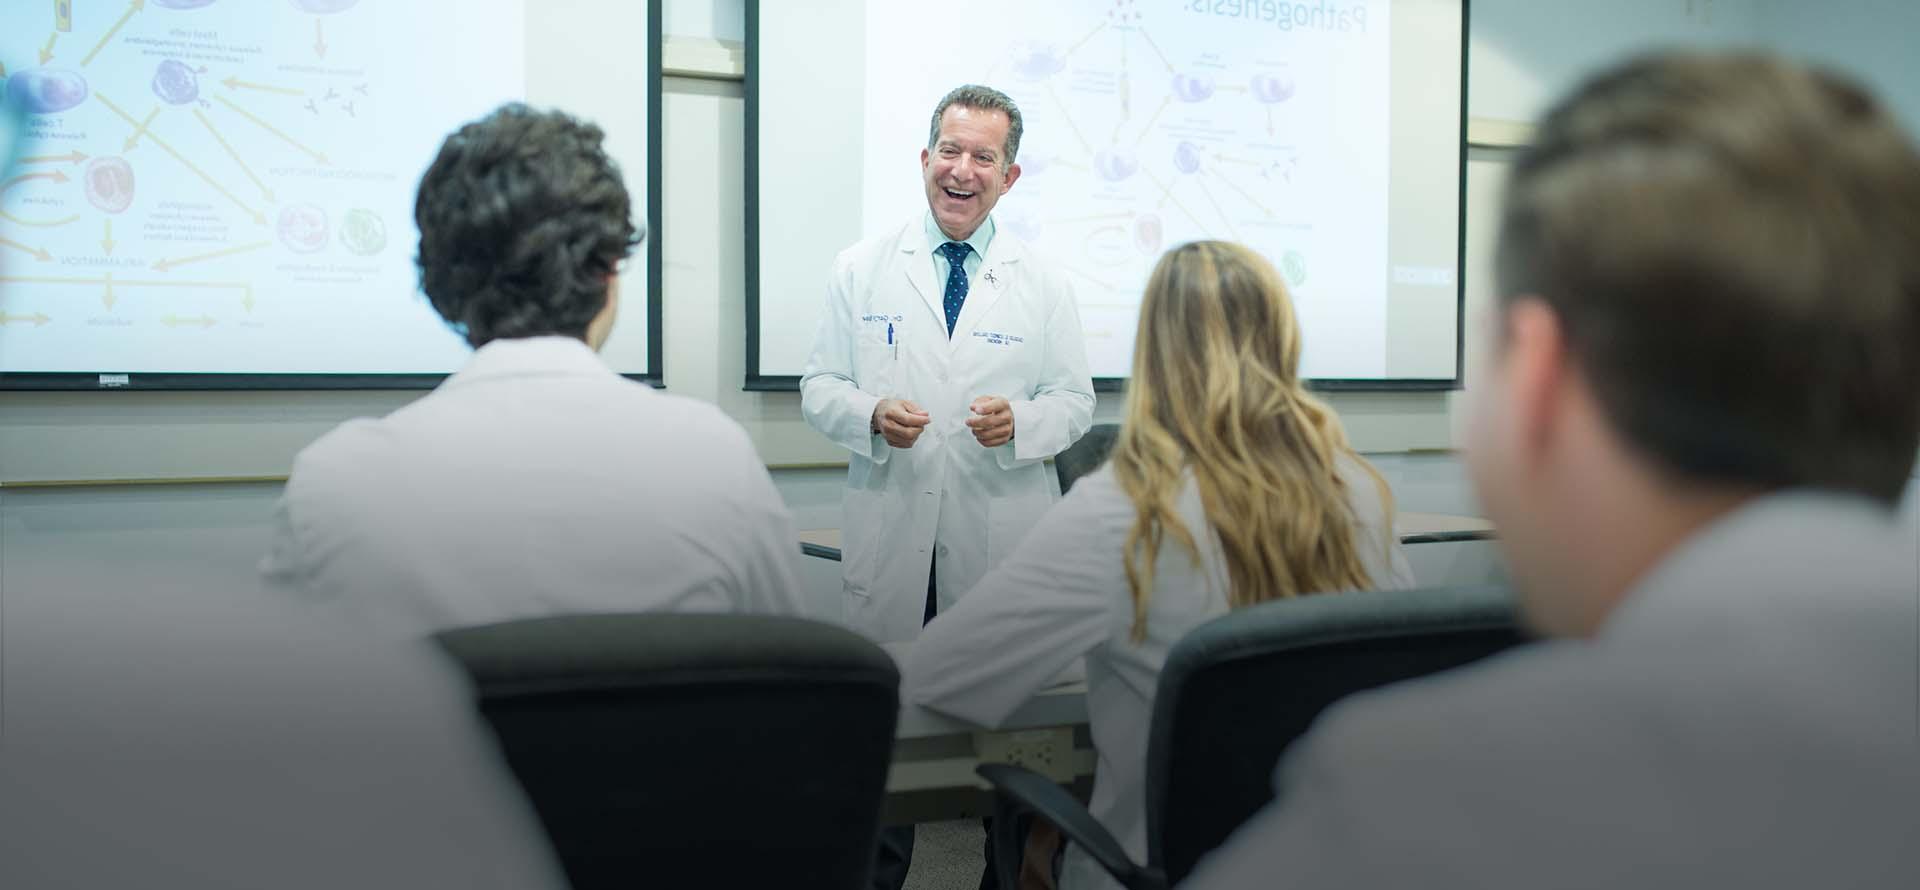 Professor smiling in front of class in white lab coat